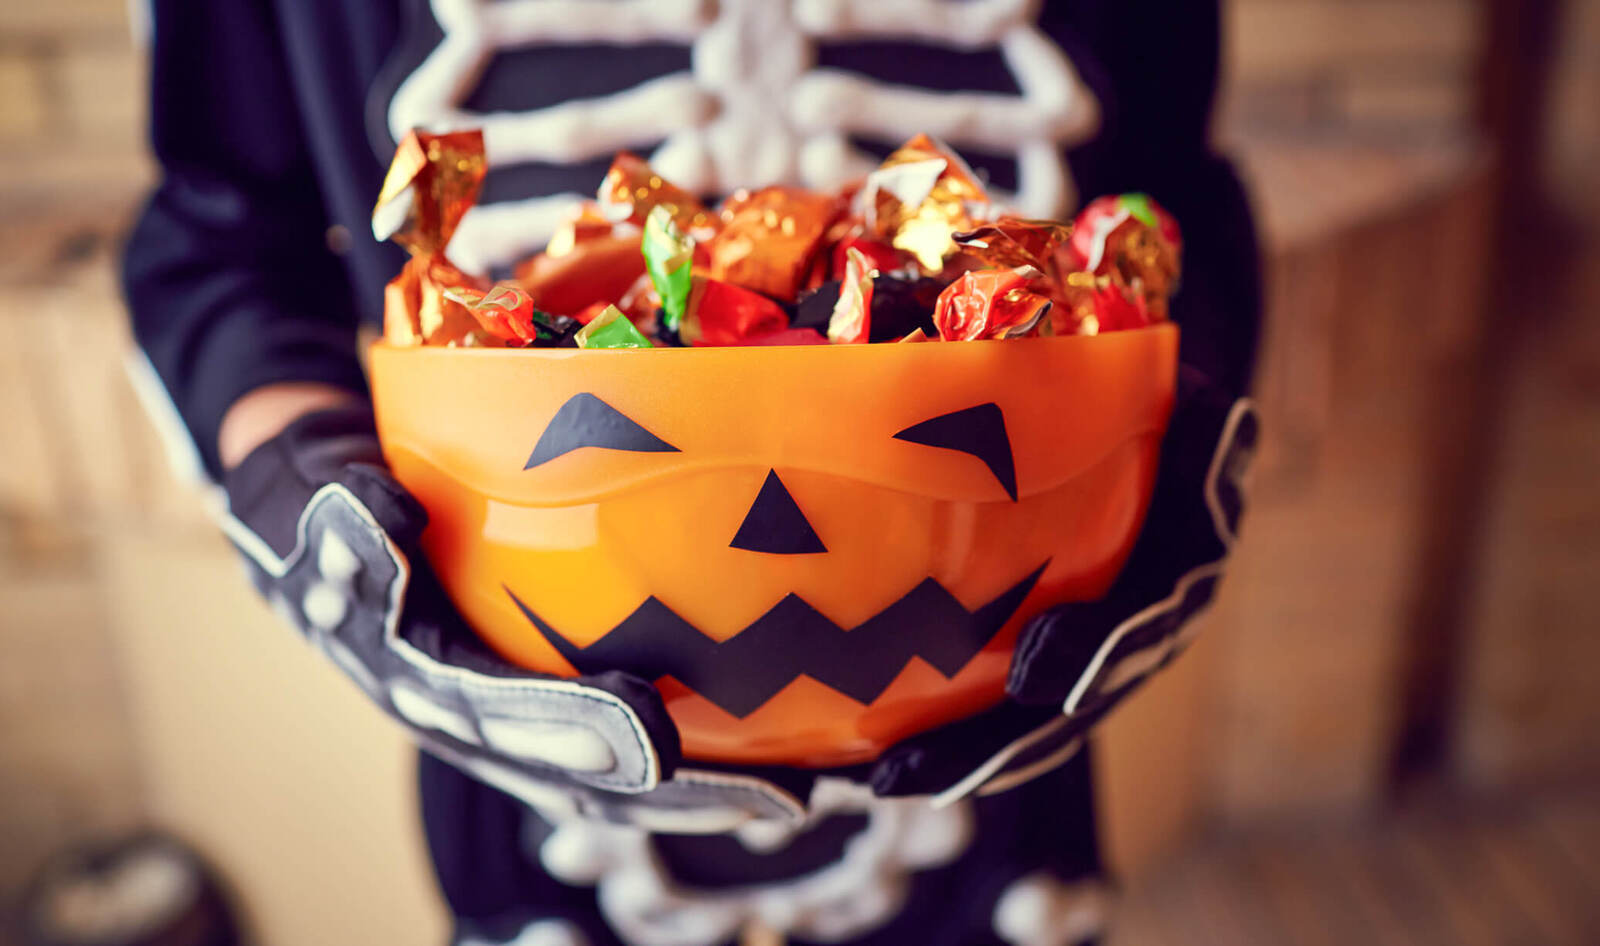 5 Terrifying Ingredients Hidden in Halloween Candy That Are Scarier Than Zombies&nbsp;